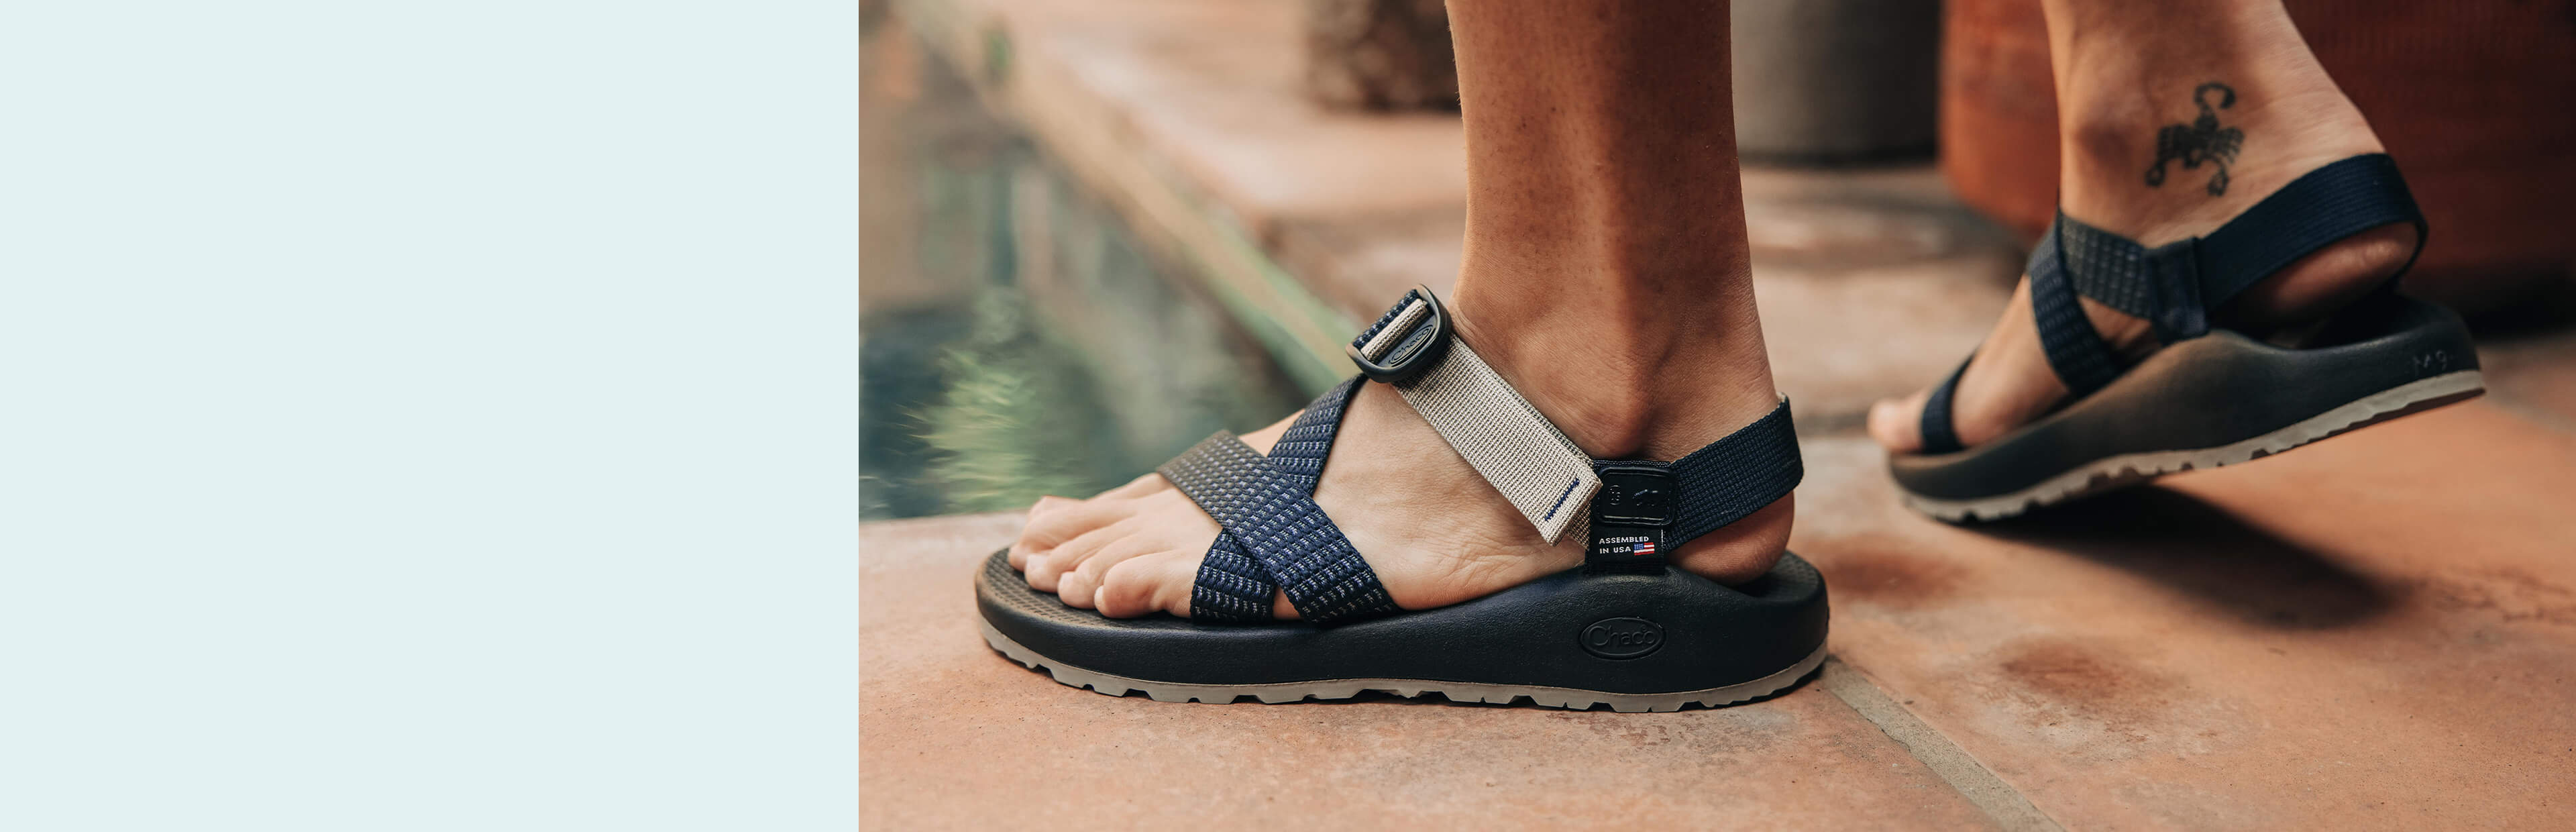 Limited edition Chaco x Taylor Stitch sandals.